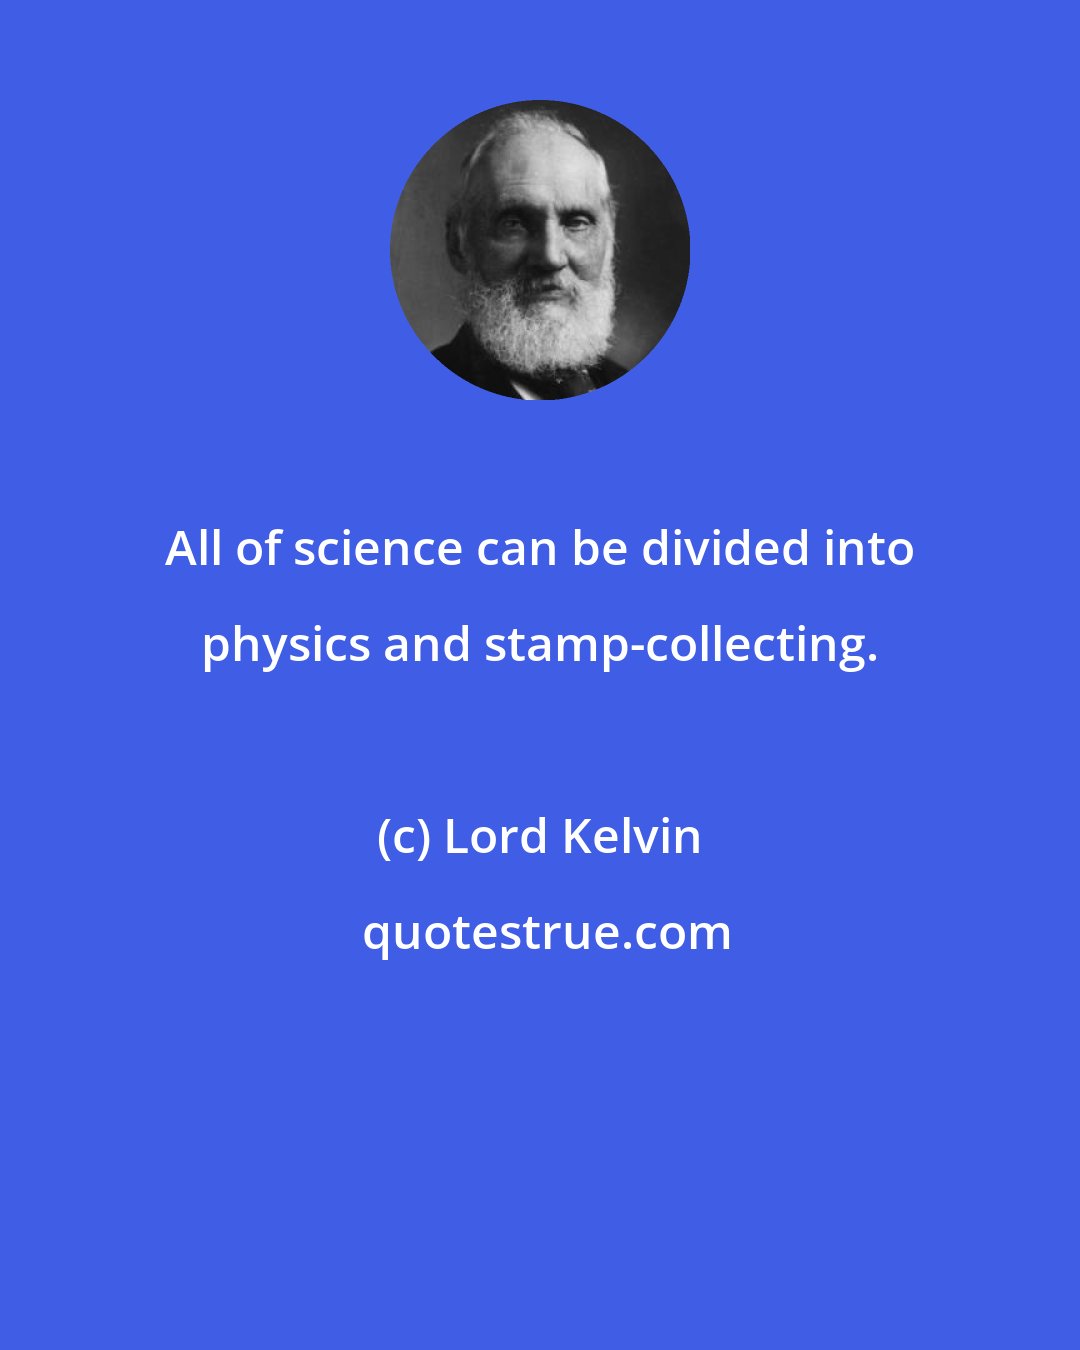 Lord Kelvin: All of science can be divided into physics and stamp-collecting.